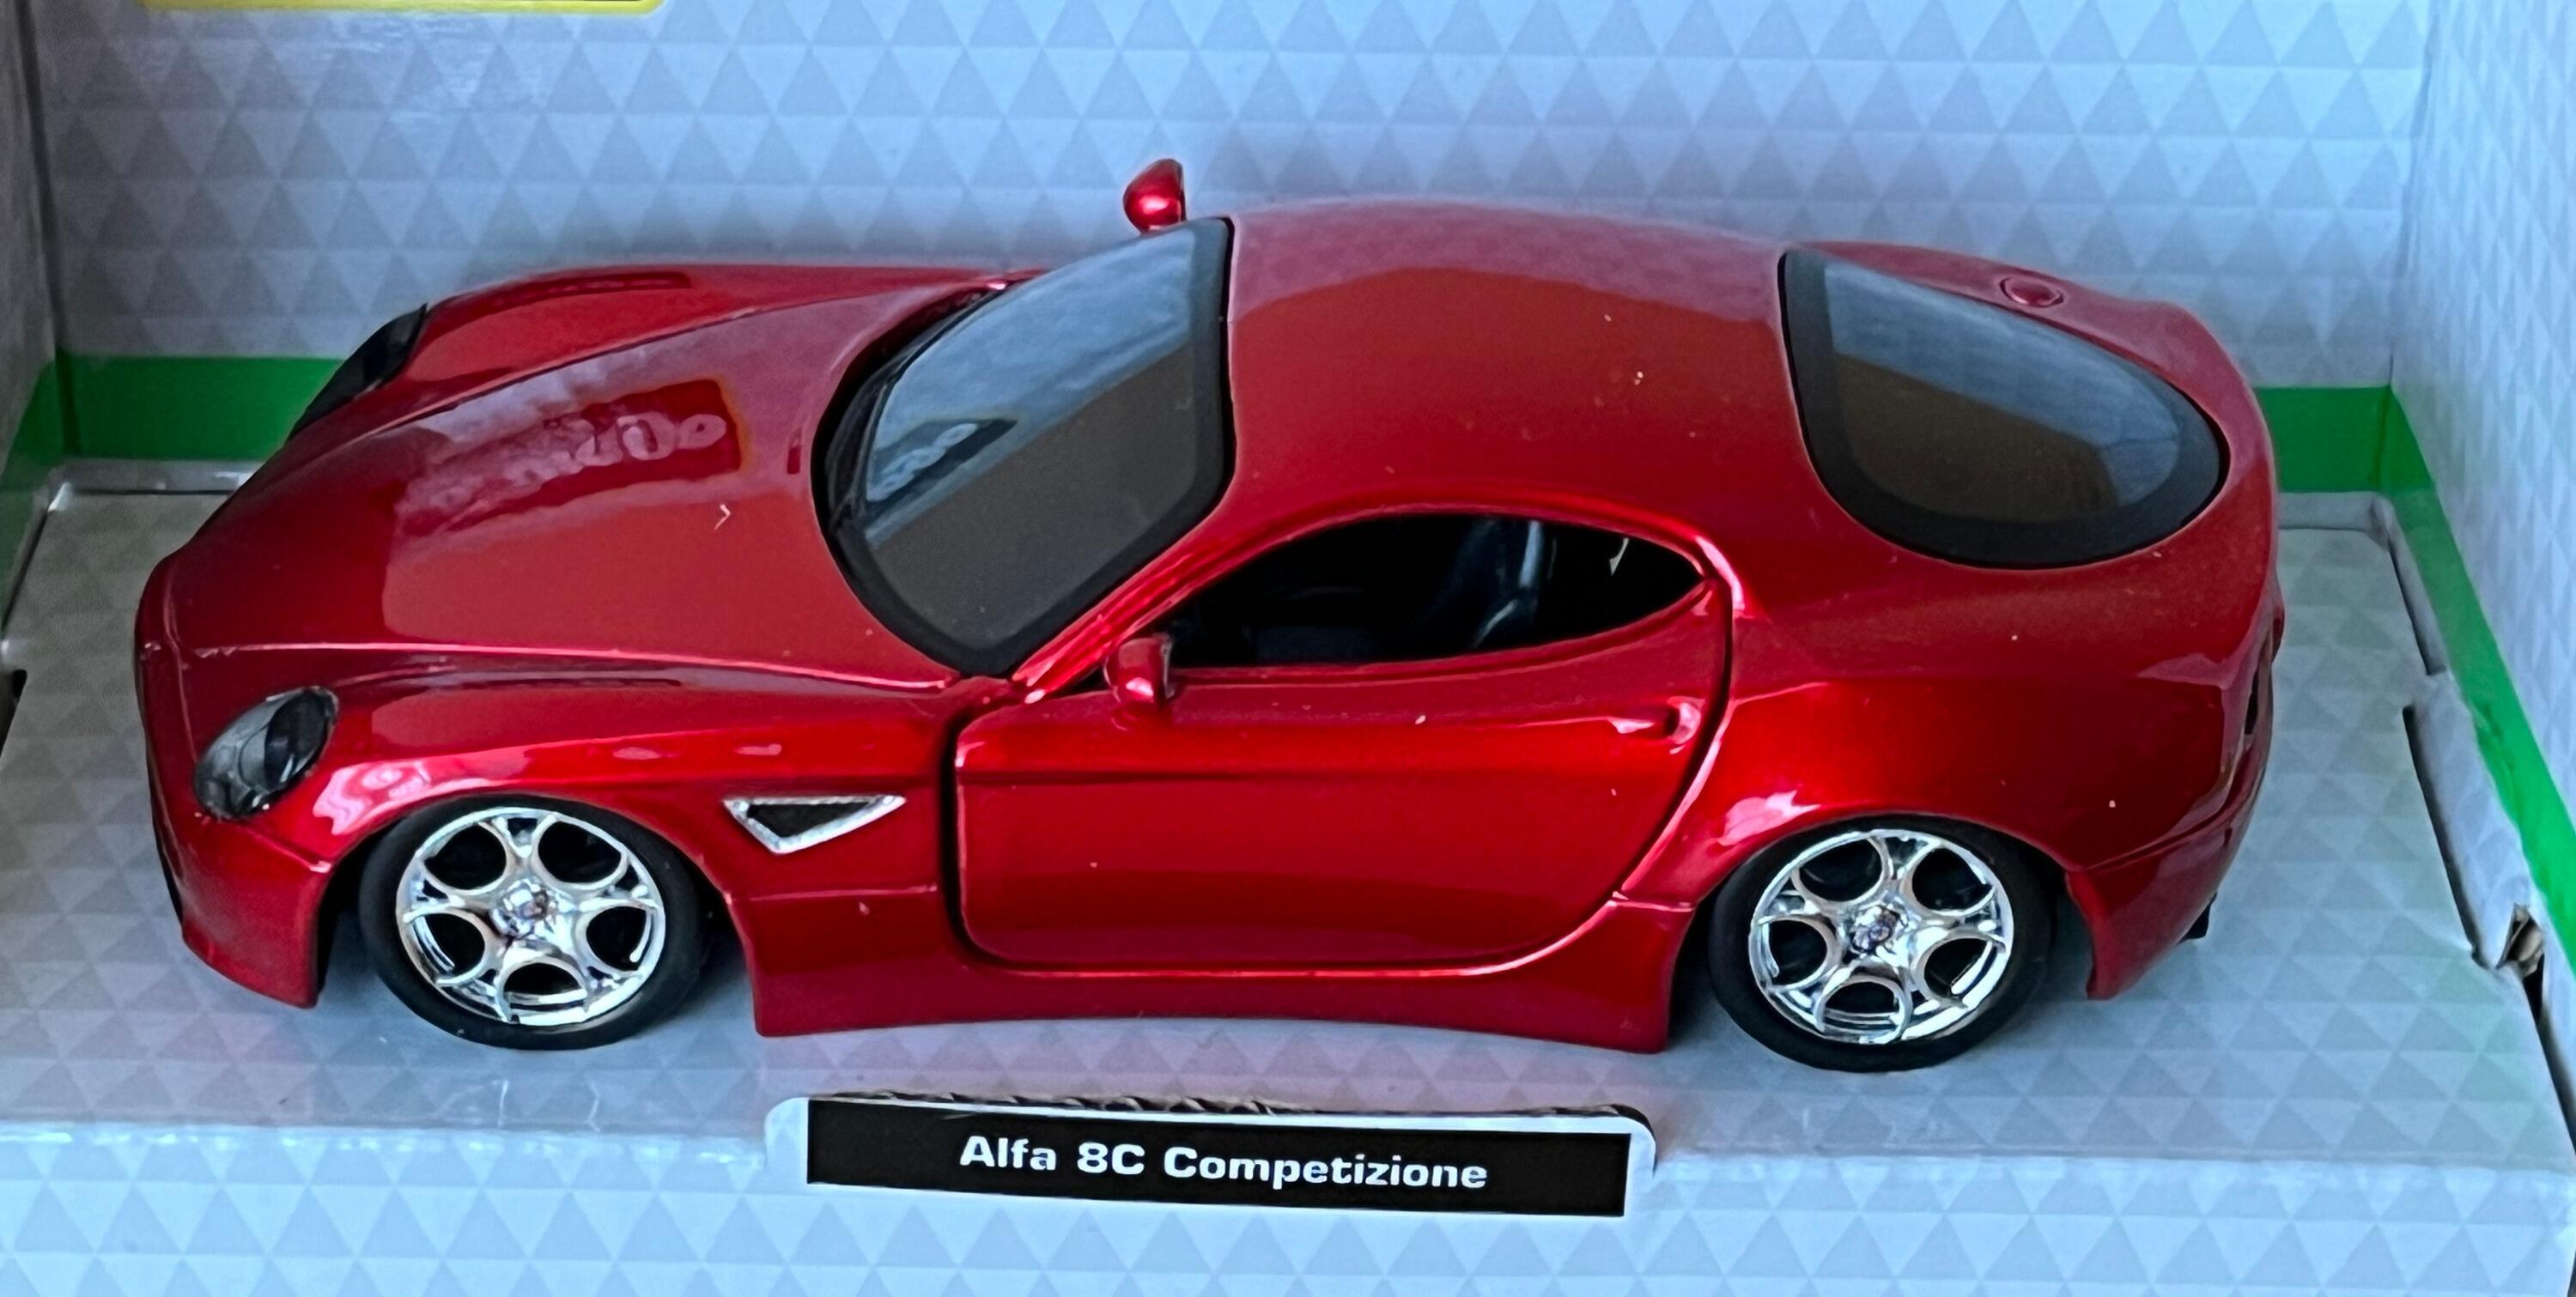 he Alfa 8C Competizione is decorated in metallic red with silver wheels.  Other trims are finished in black and silver.  Features include working wheels, opening driver and passenger doors.